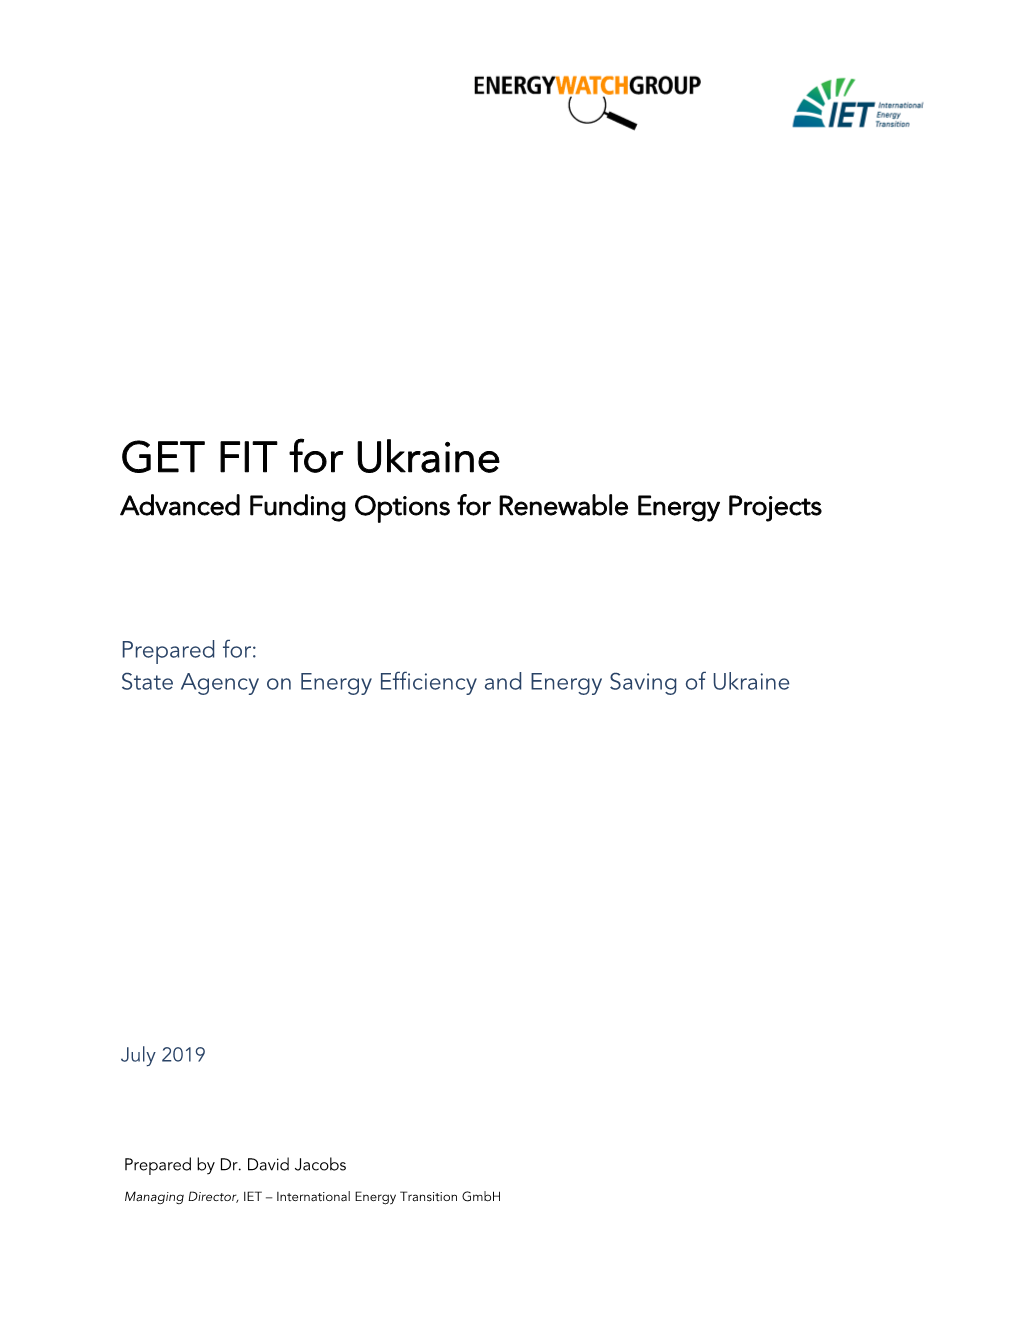 GET FIT for Ukraine Advanced Funding Options for Renewable Energy Projects